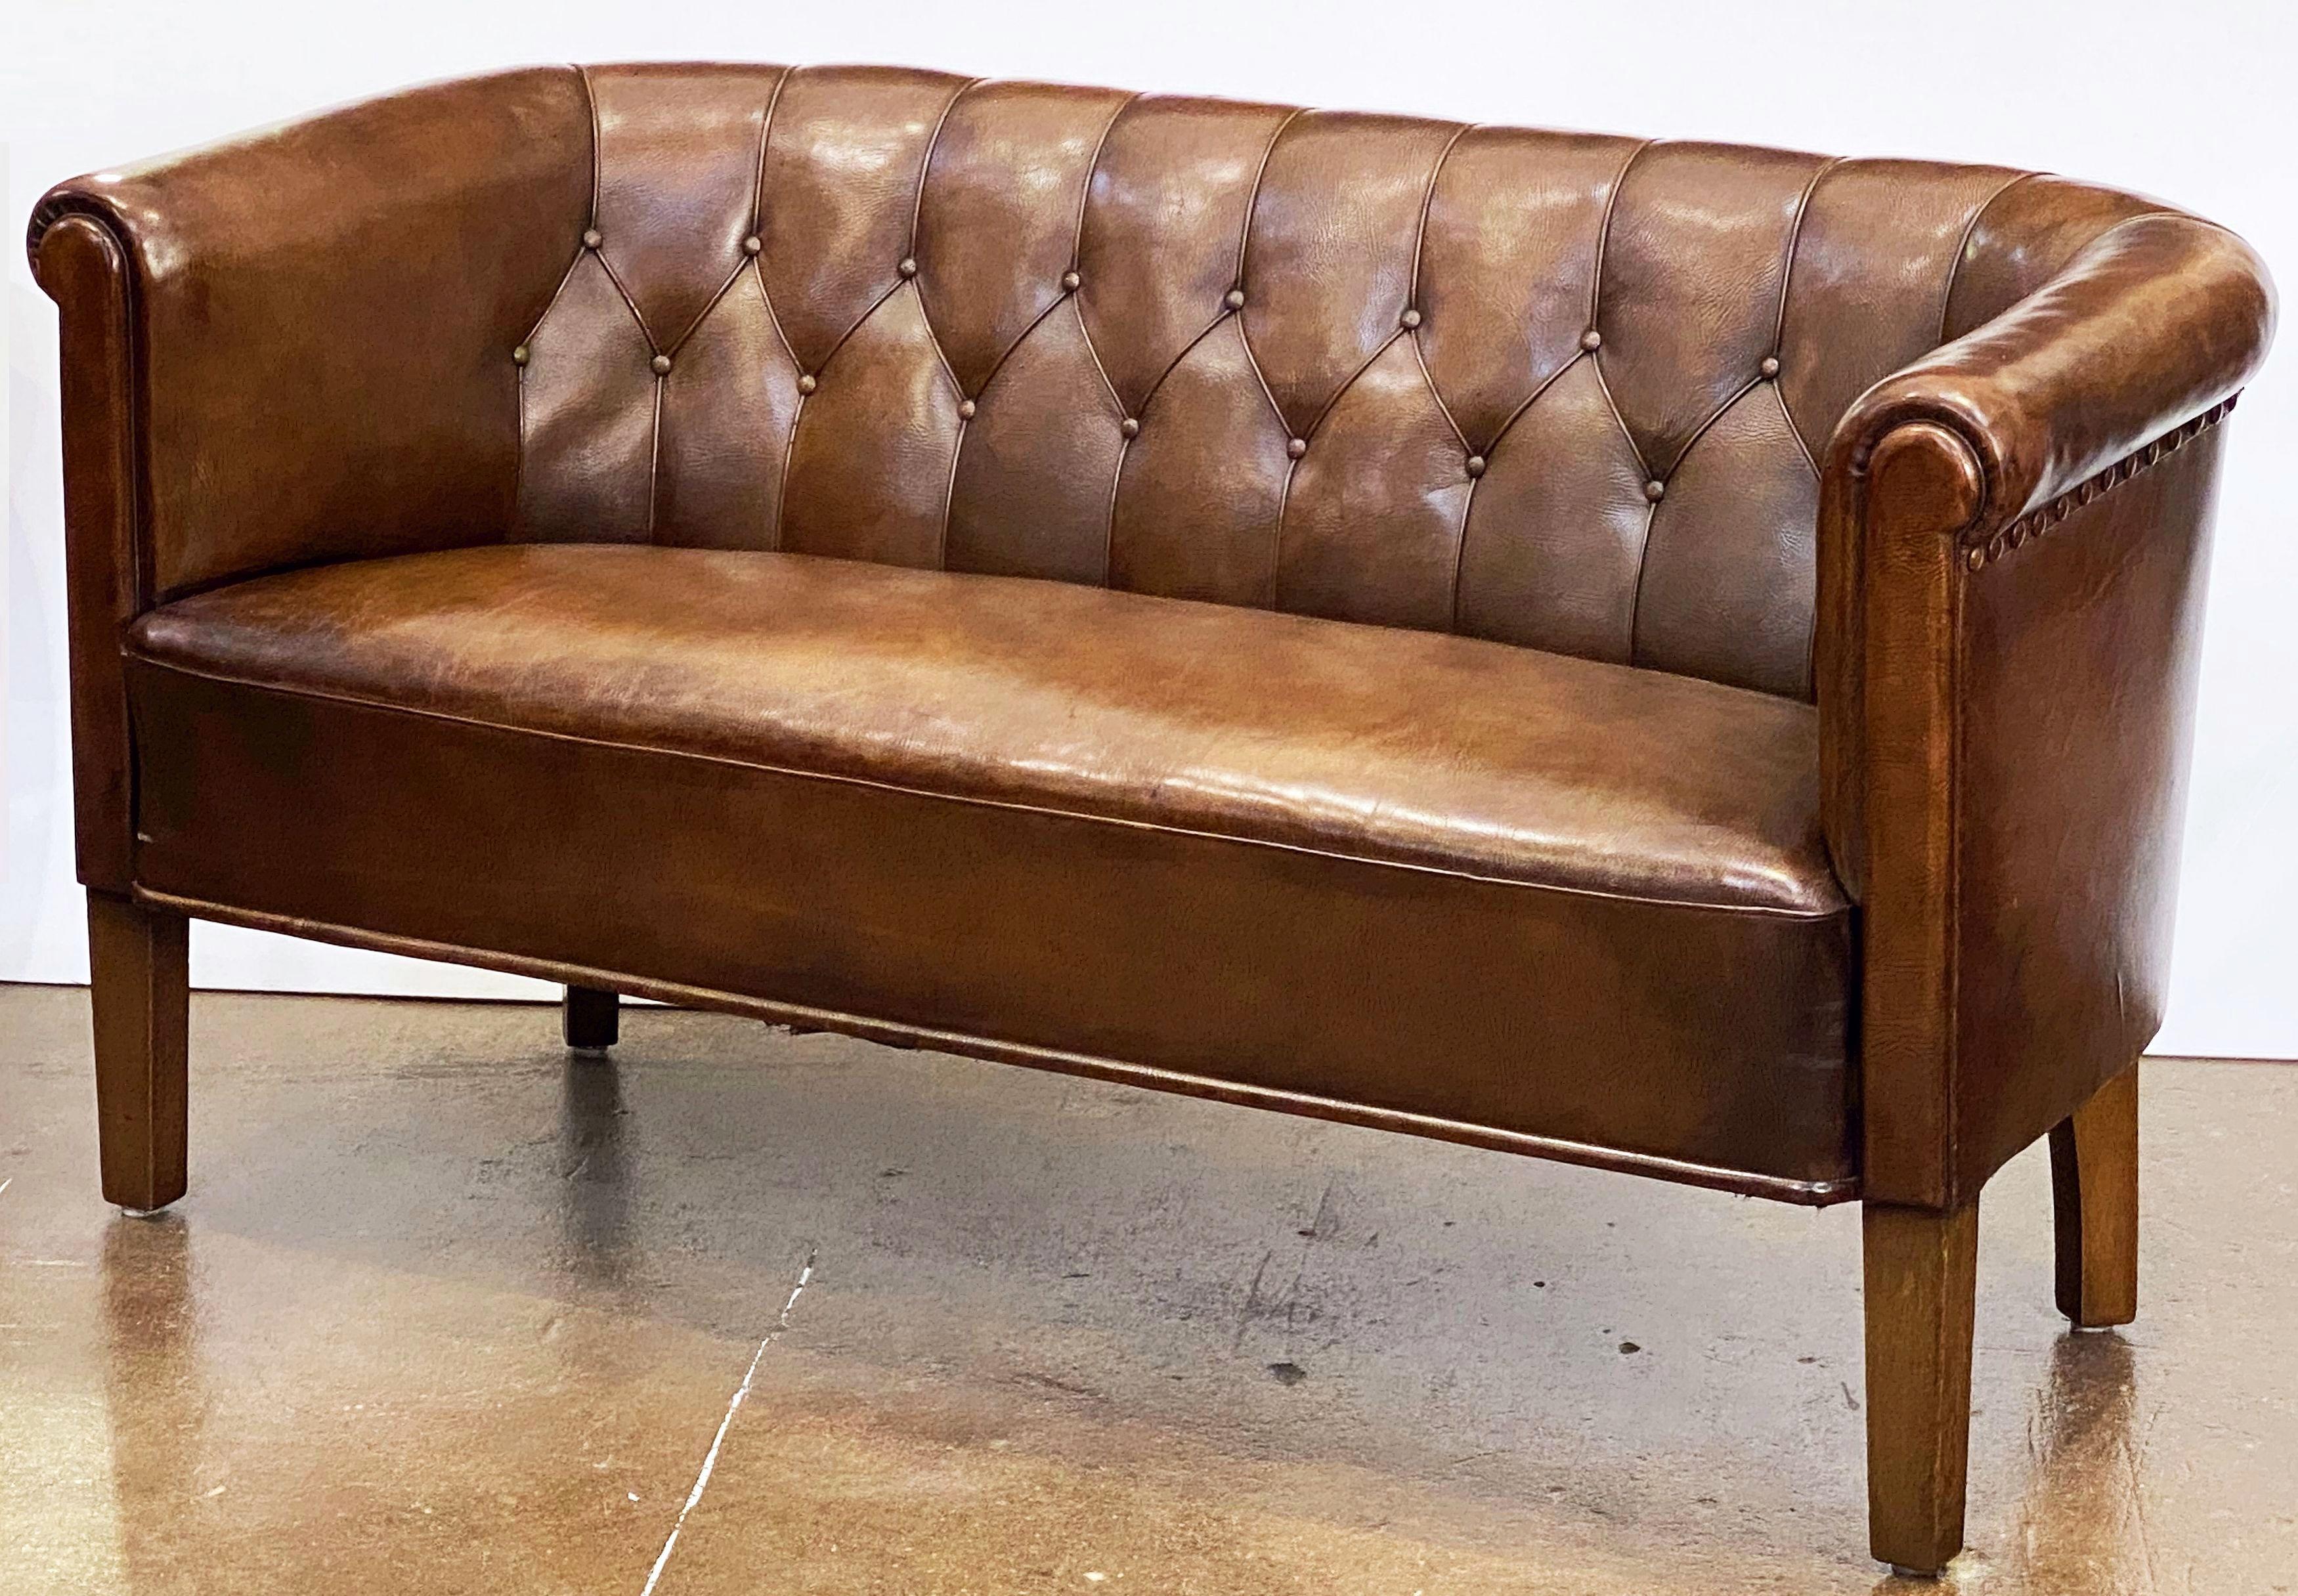 Swedish Mid-Century Modern Leather Sofa or Settee with Tufted Back 6